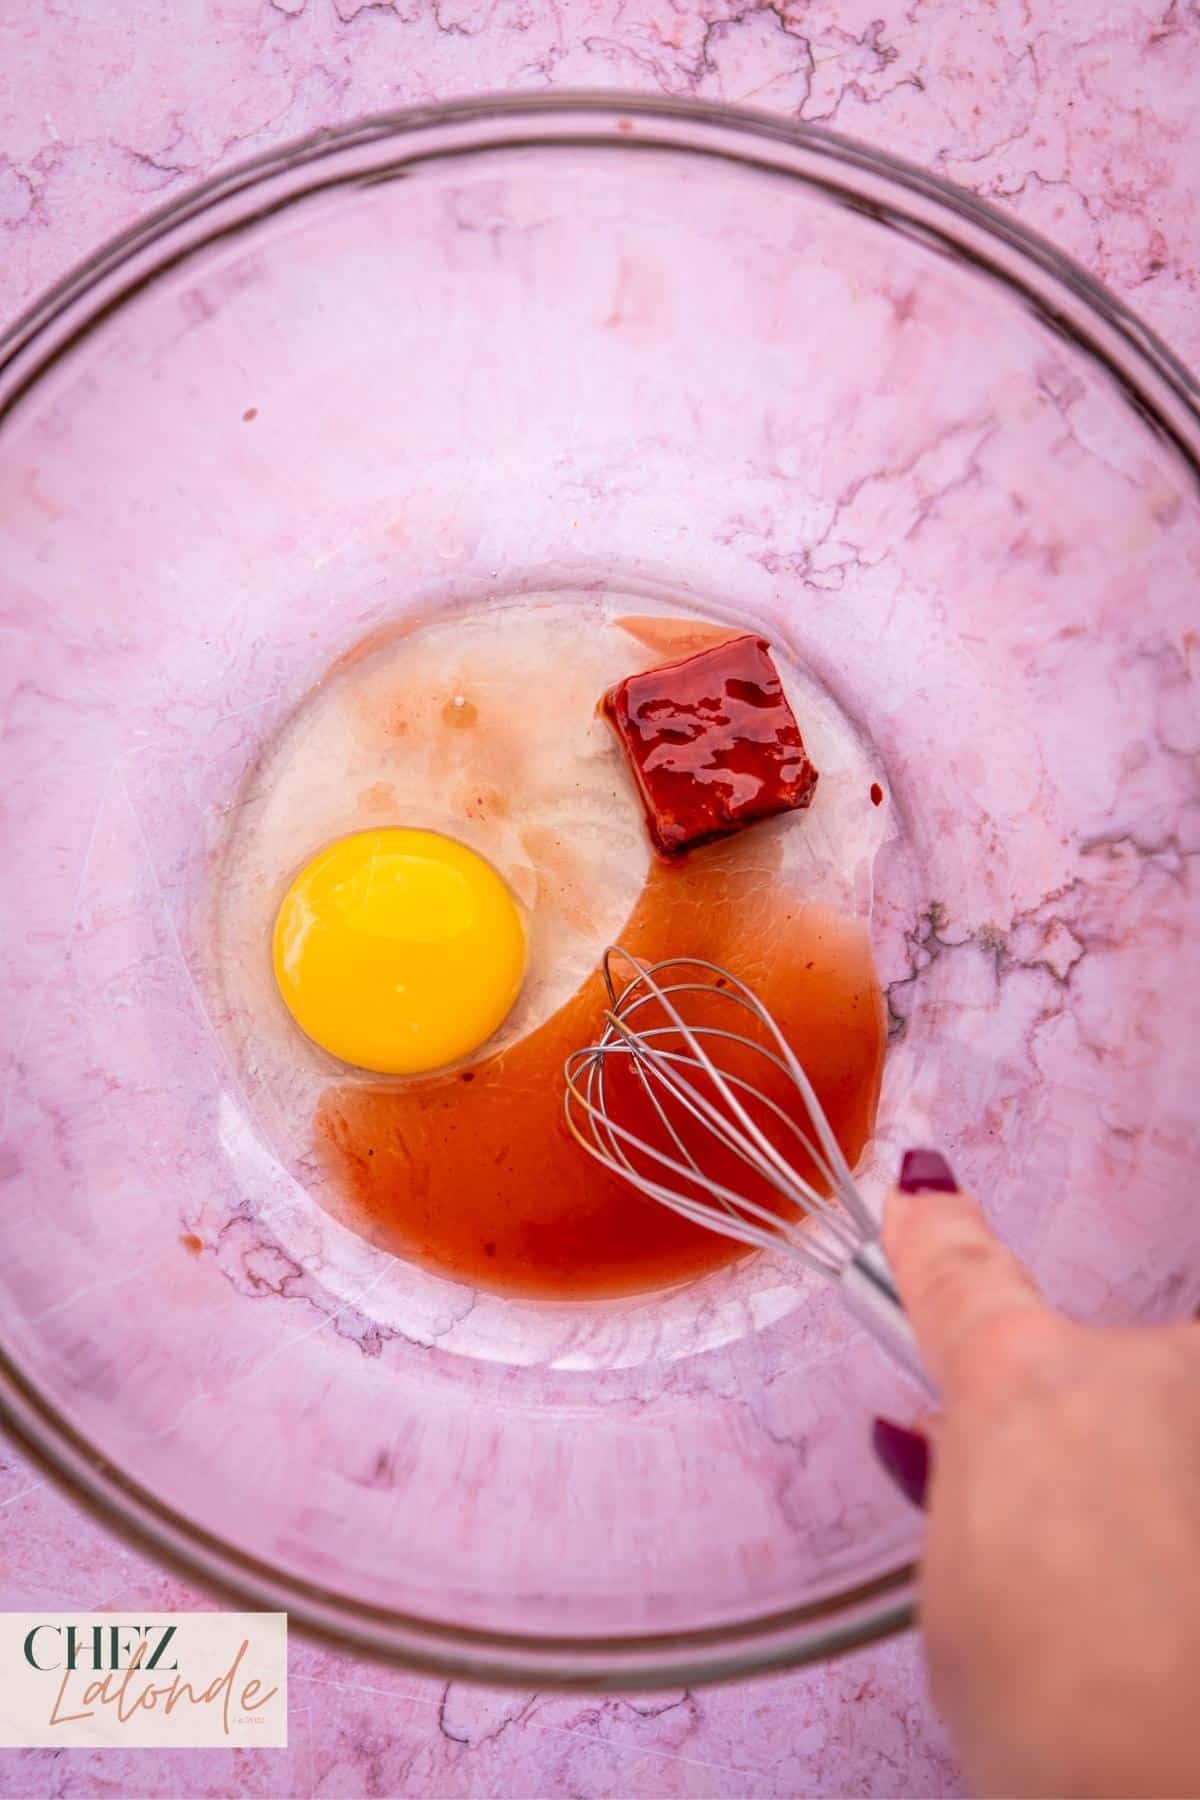 In a large bowl, whisk a large egg, combining it with a piece of fermented red bean curd and a tablespoon of red bean curd juice.